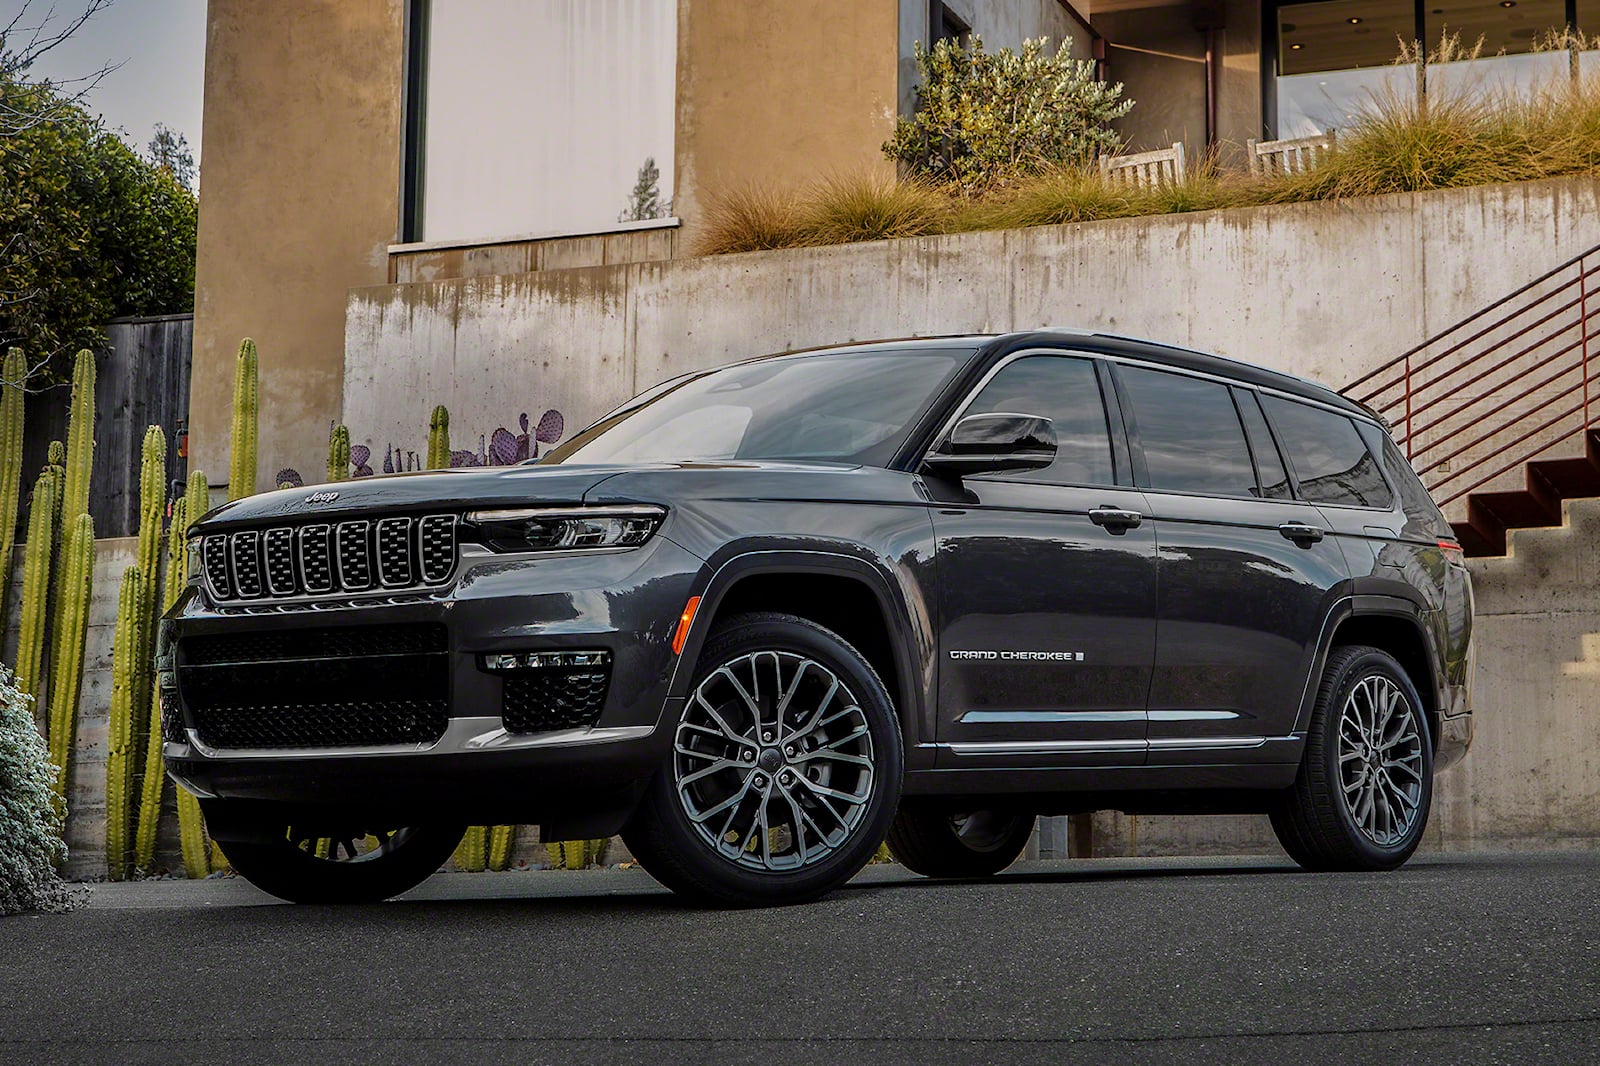 Taking the Jeep Trackhawk for a height test – because even at 7 feet t